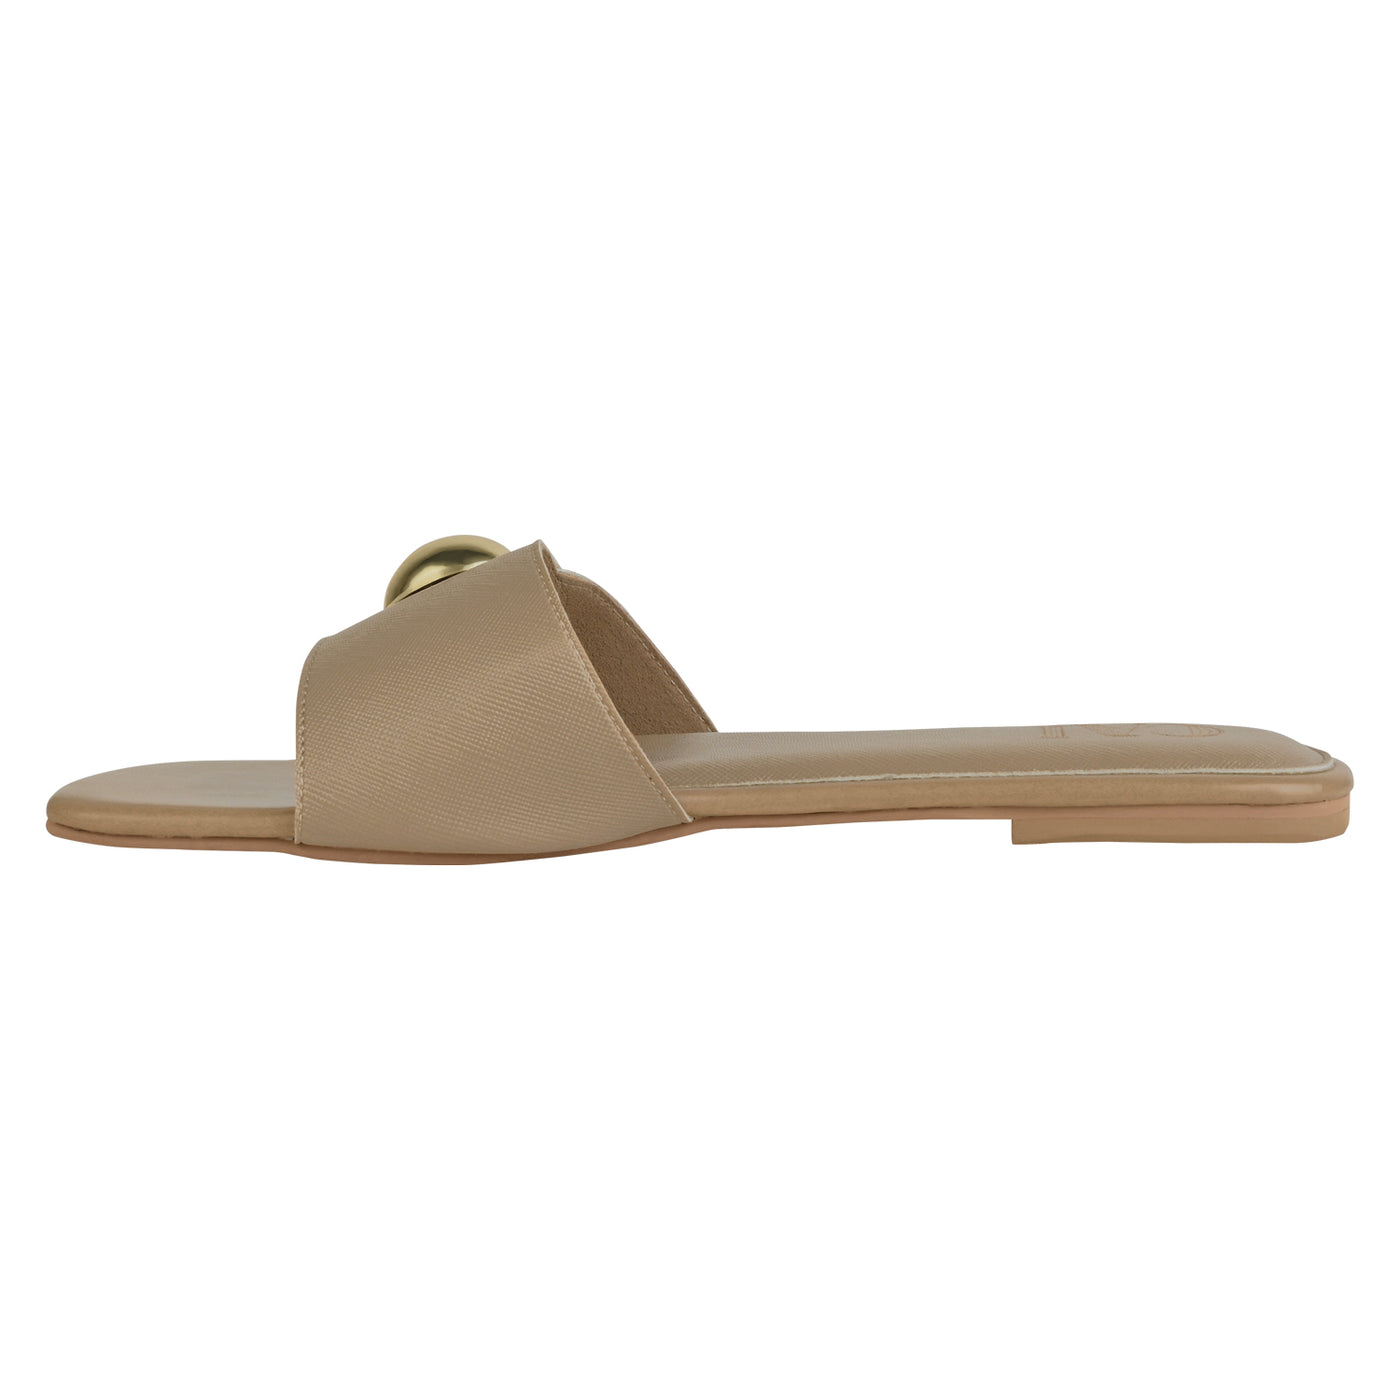 Button Up Beige Slides at CAI Store